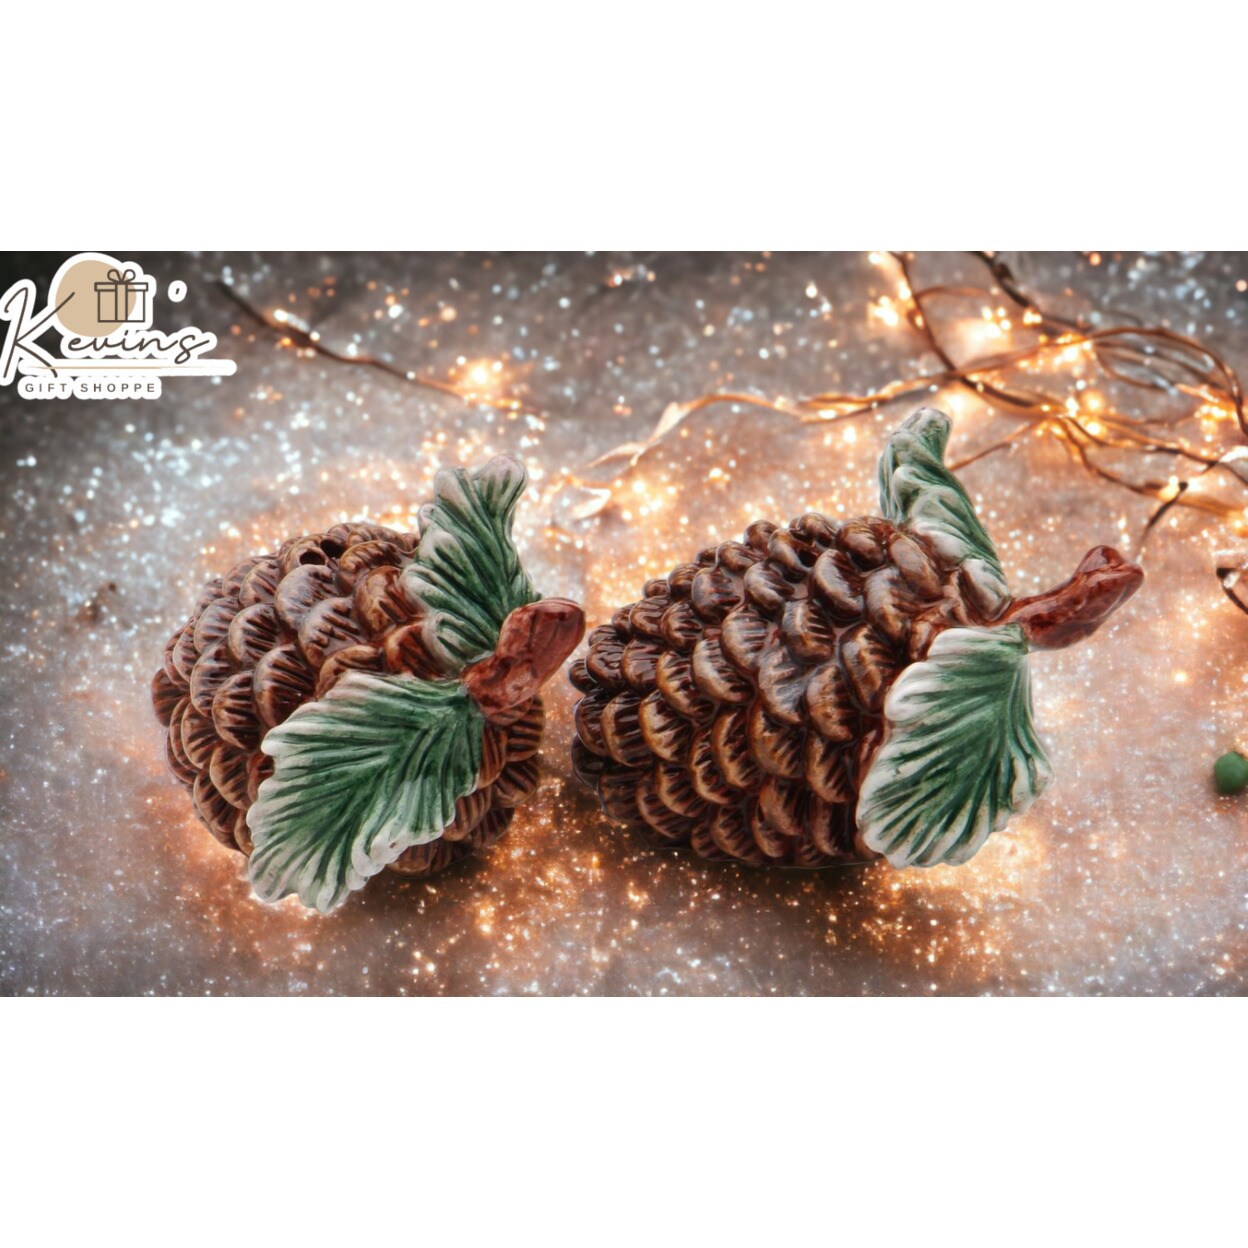 kevinsgiftshoppe Ceramic Christmas Pine Cone Salt and Pepper Shakers Home Decor   Kitchen Decor Christmas Decor